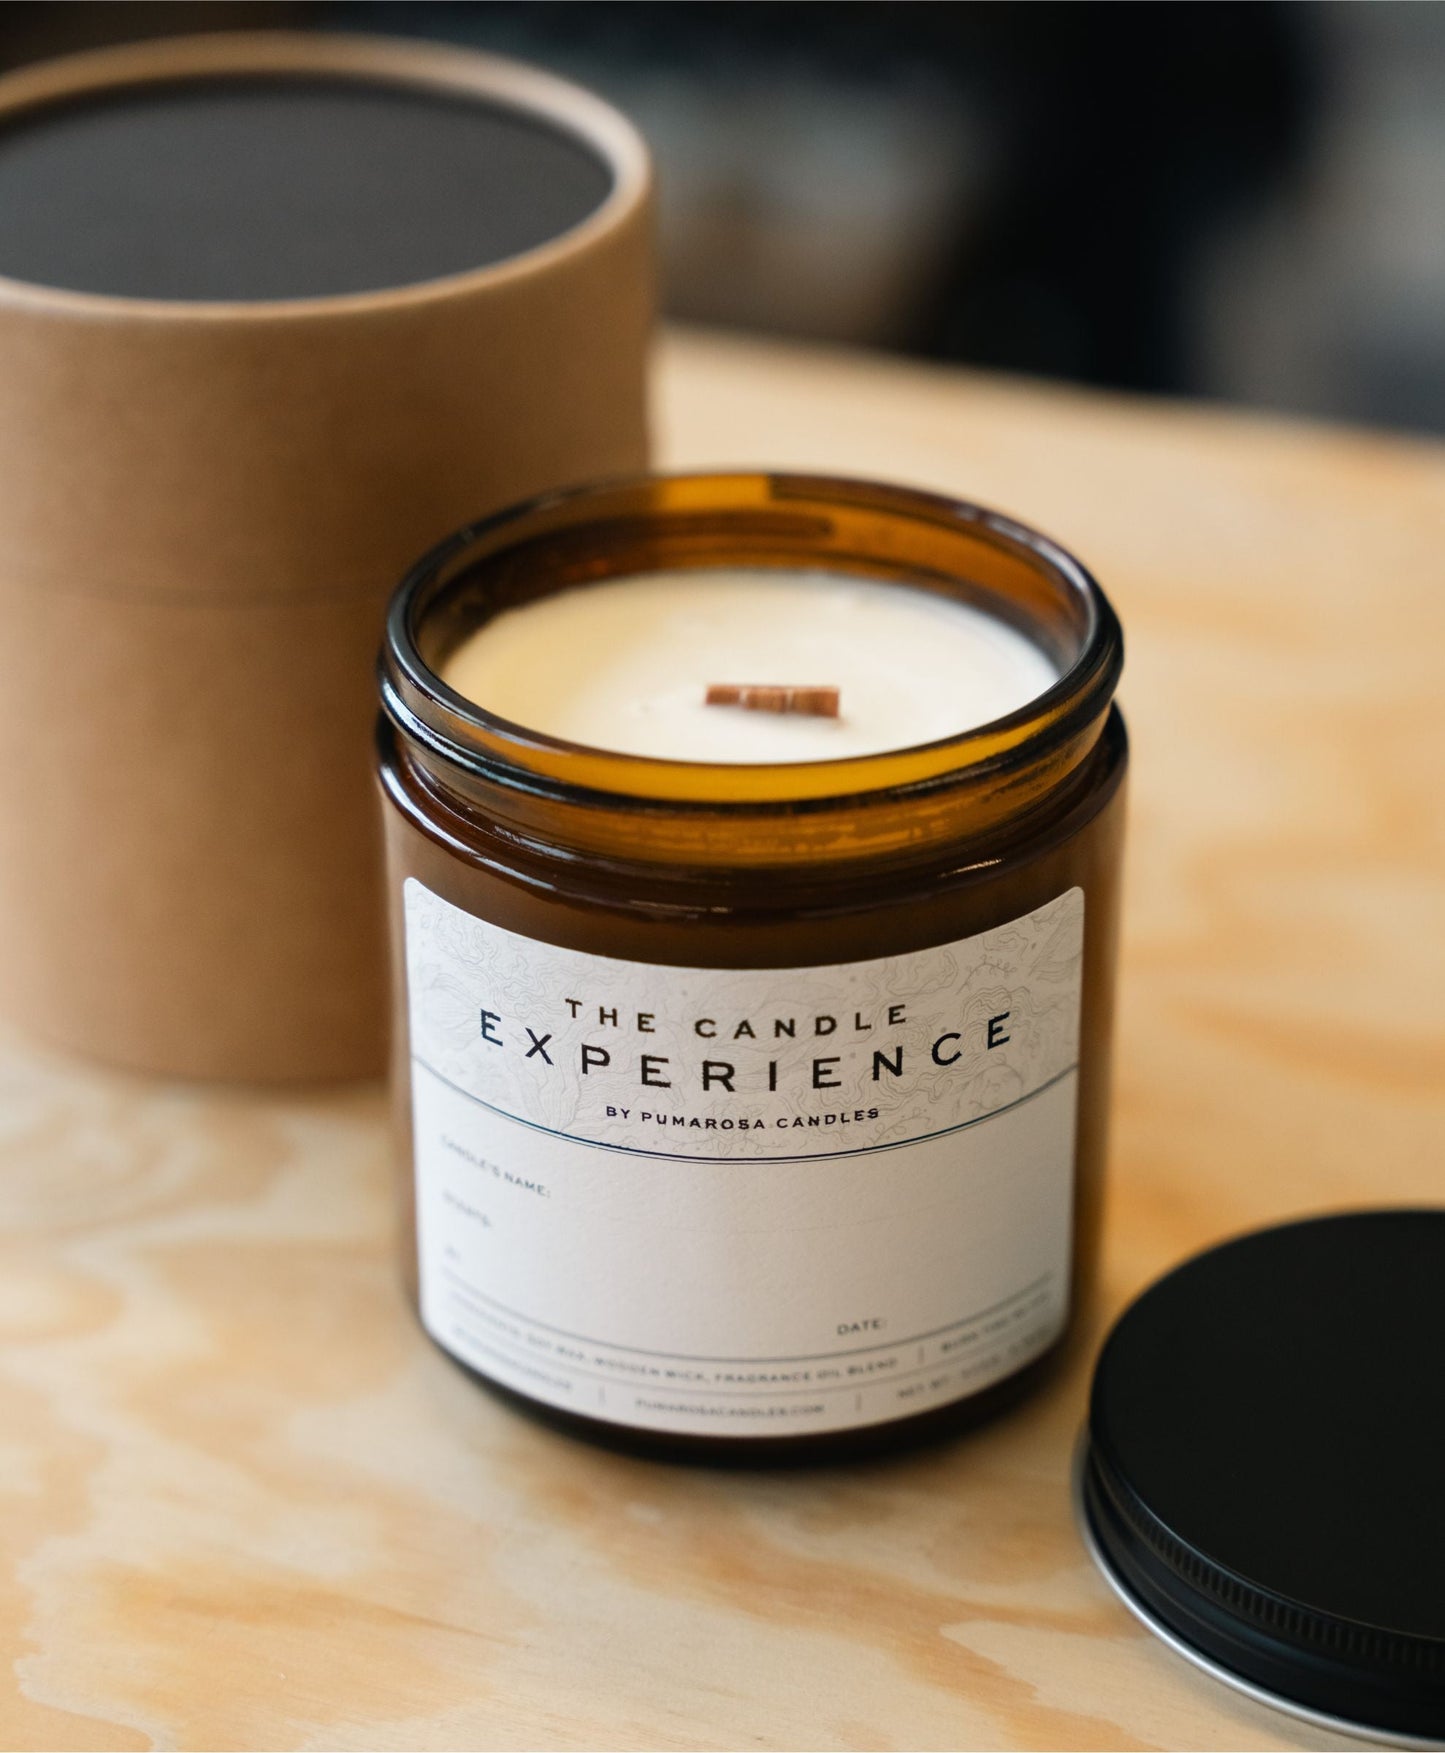 Candle-Making Experience: March, 23 at 4pm